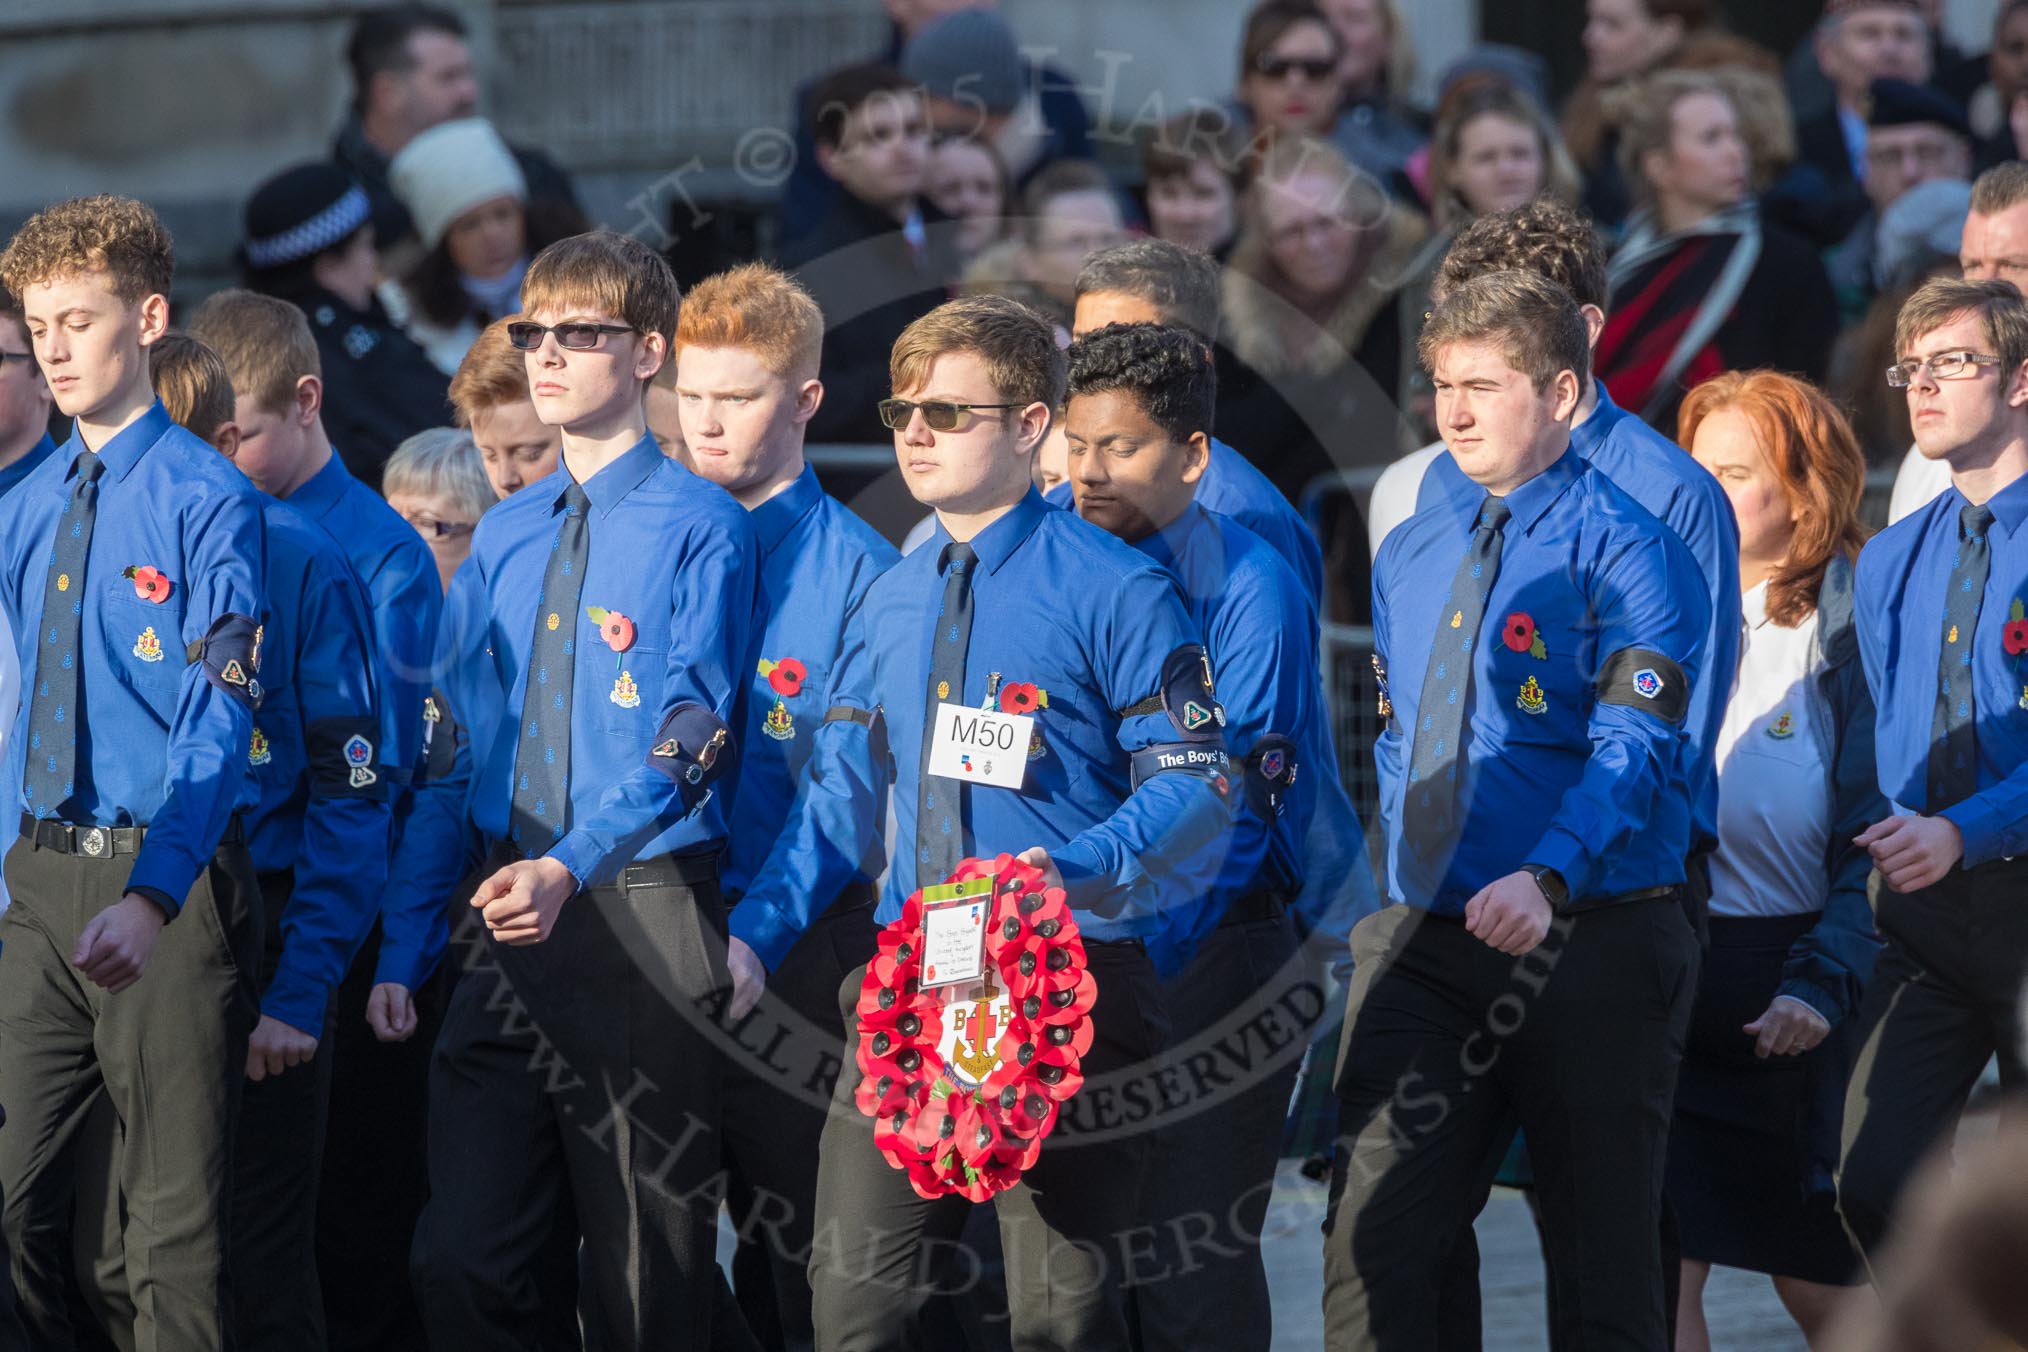 March Past, Remembrance Sunday at the Cenotaph 2016: M50 The Boys’ Brigade.
Cenotaph, Whitehall, London SW1,
London,
Greater London,
United Kingdom,
on 13 November 2016 at 13:20, image #3044